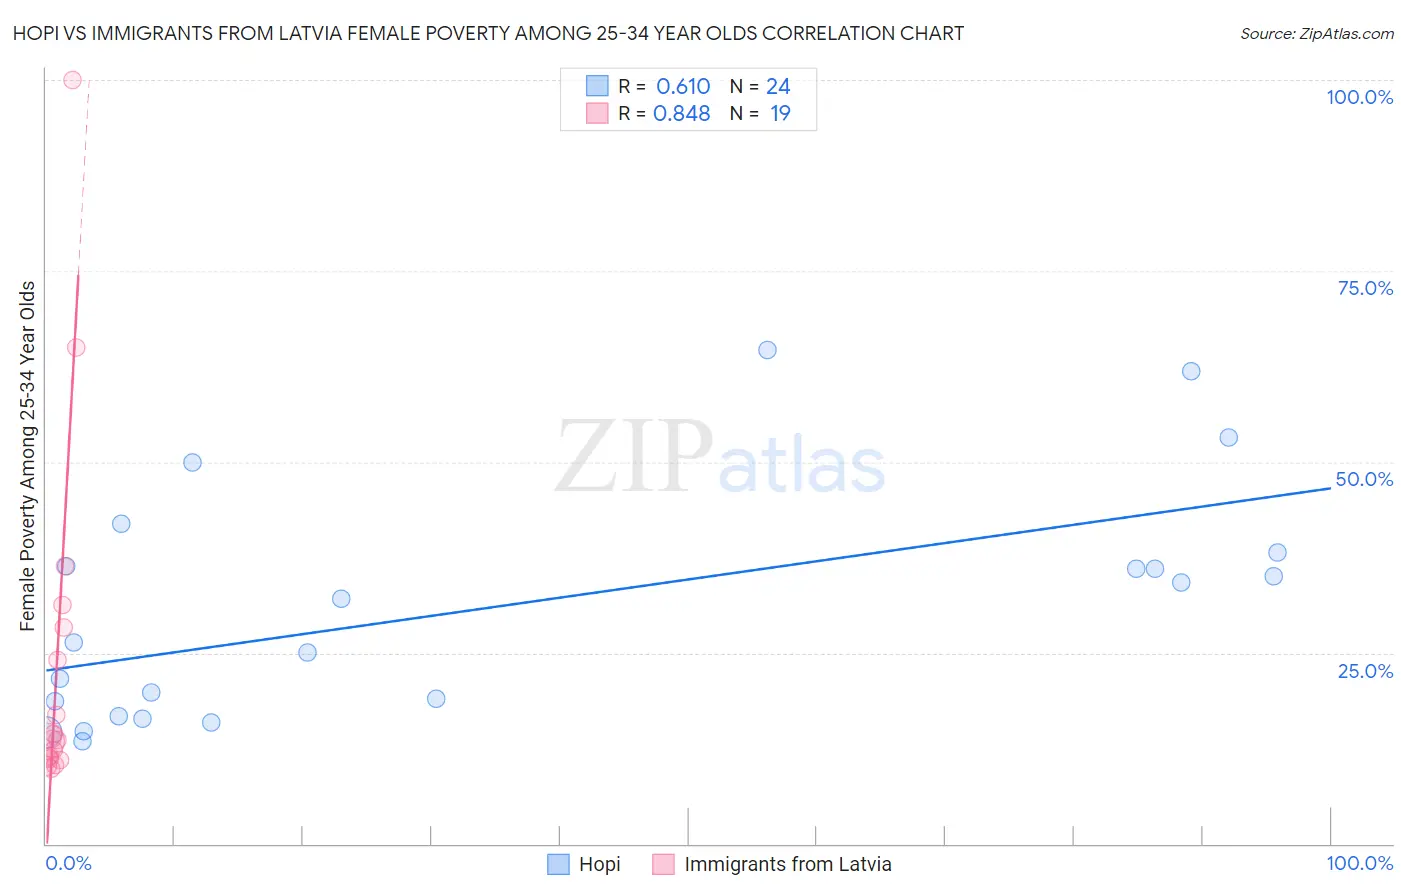 Hopi vs Immigrants from Latvia Female Poverty Among 25-34 Year Olds